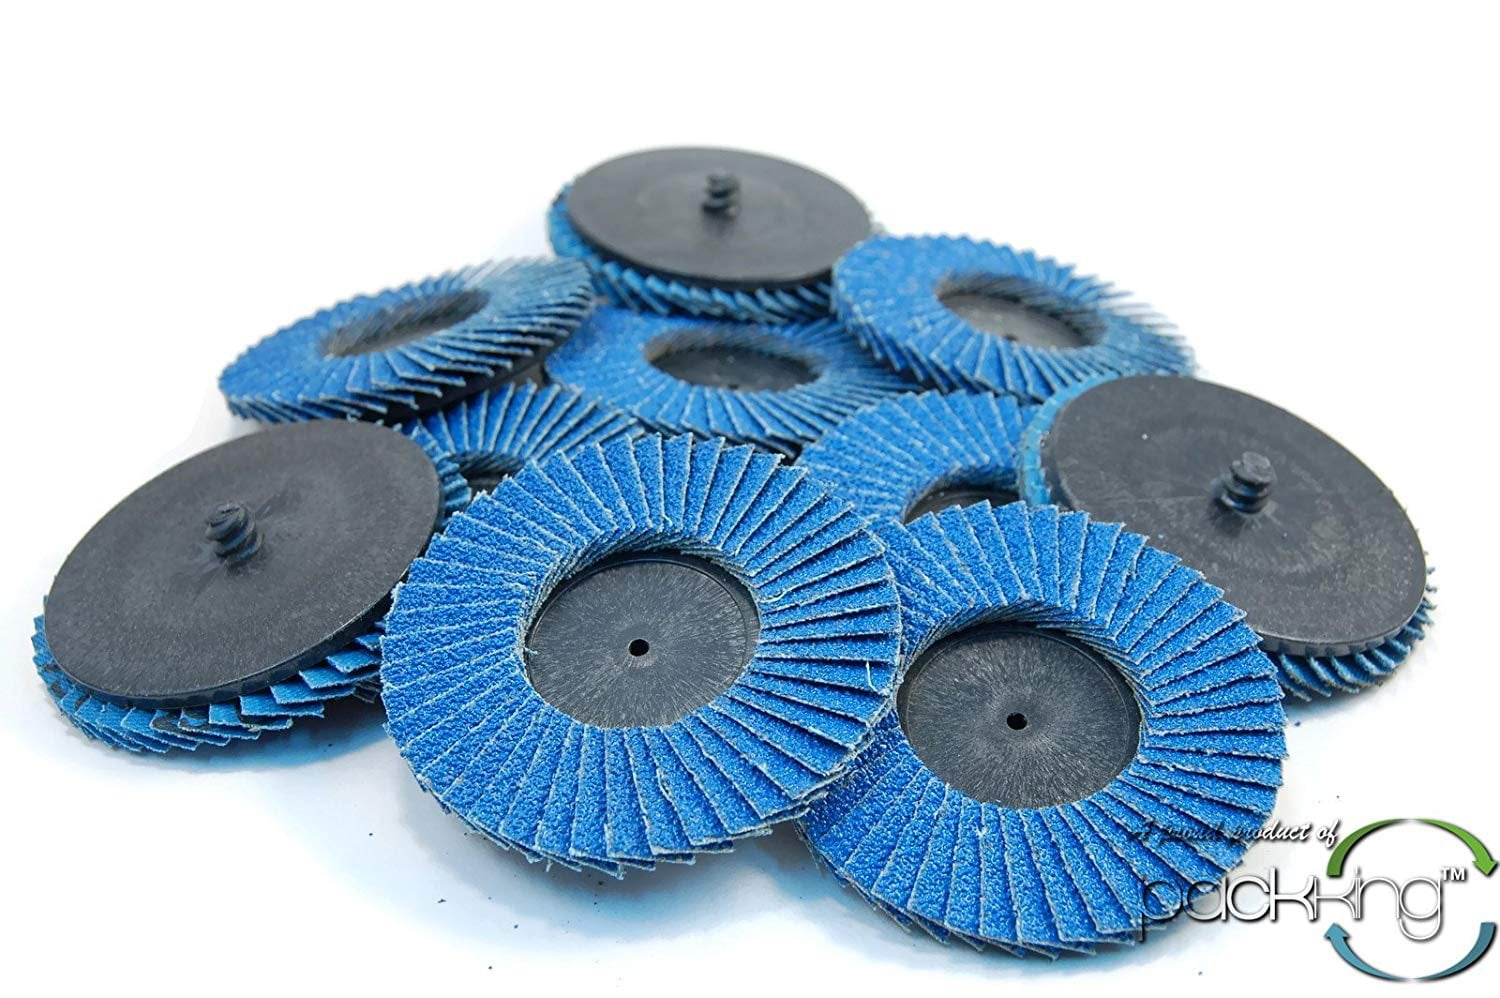 60 Grits Roll & Lock Flap Discs Grinding Polishing Wheels R-Type 50mm/2inches 